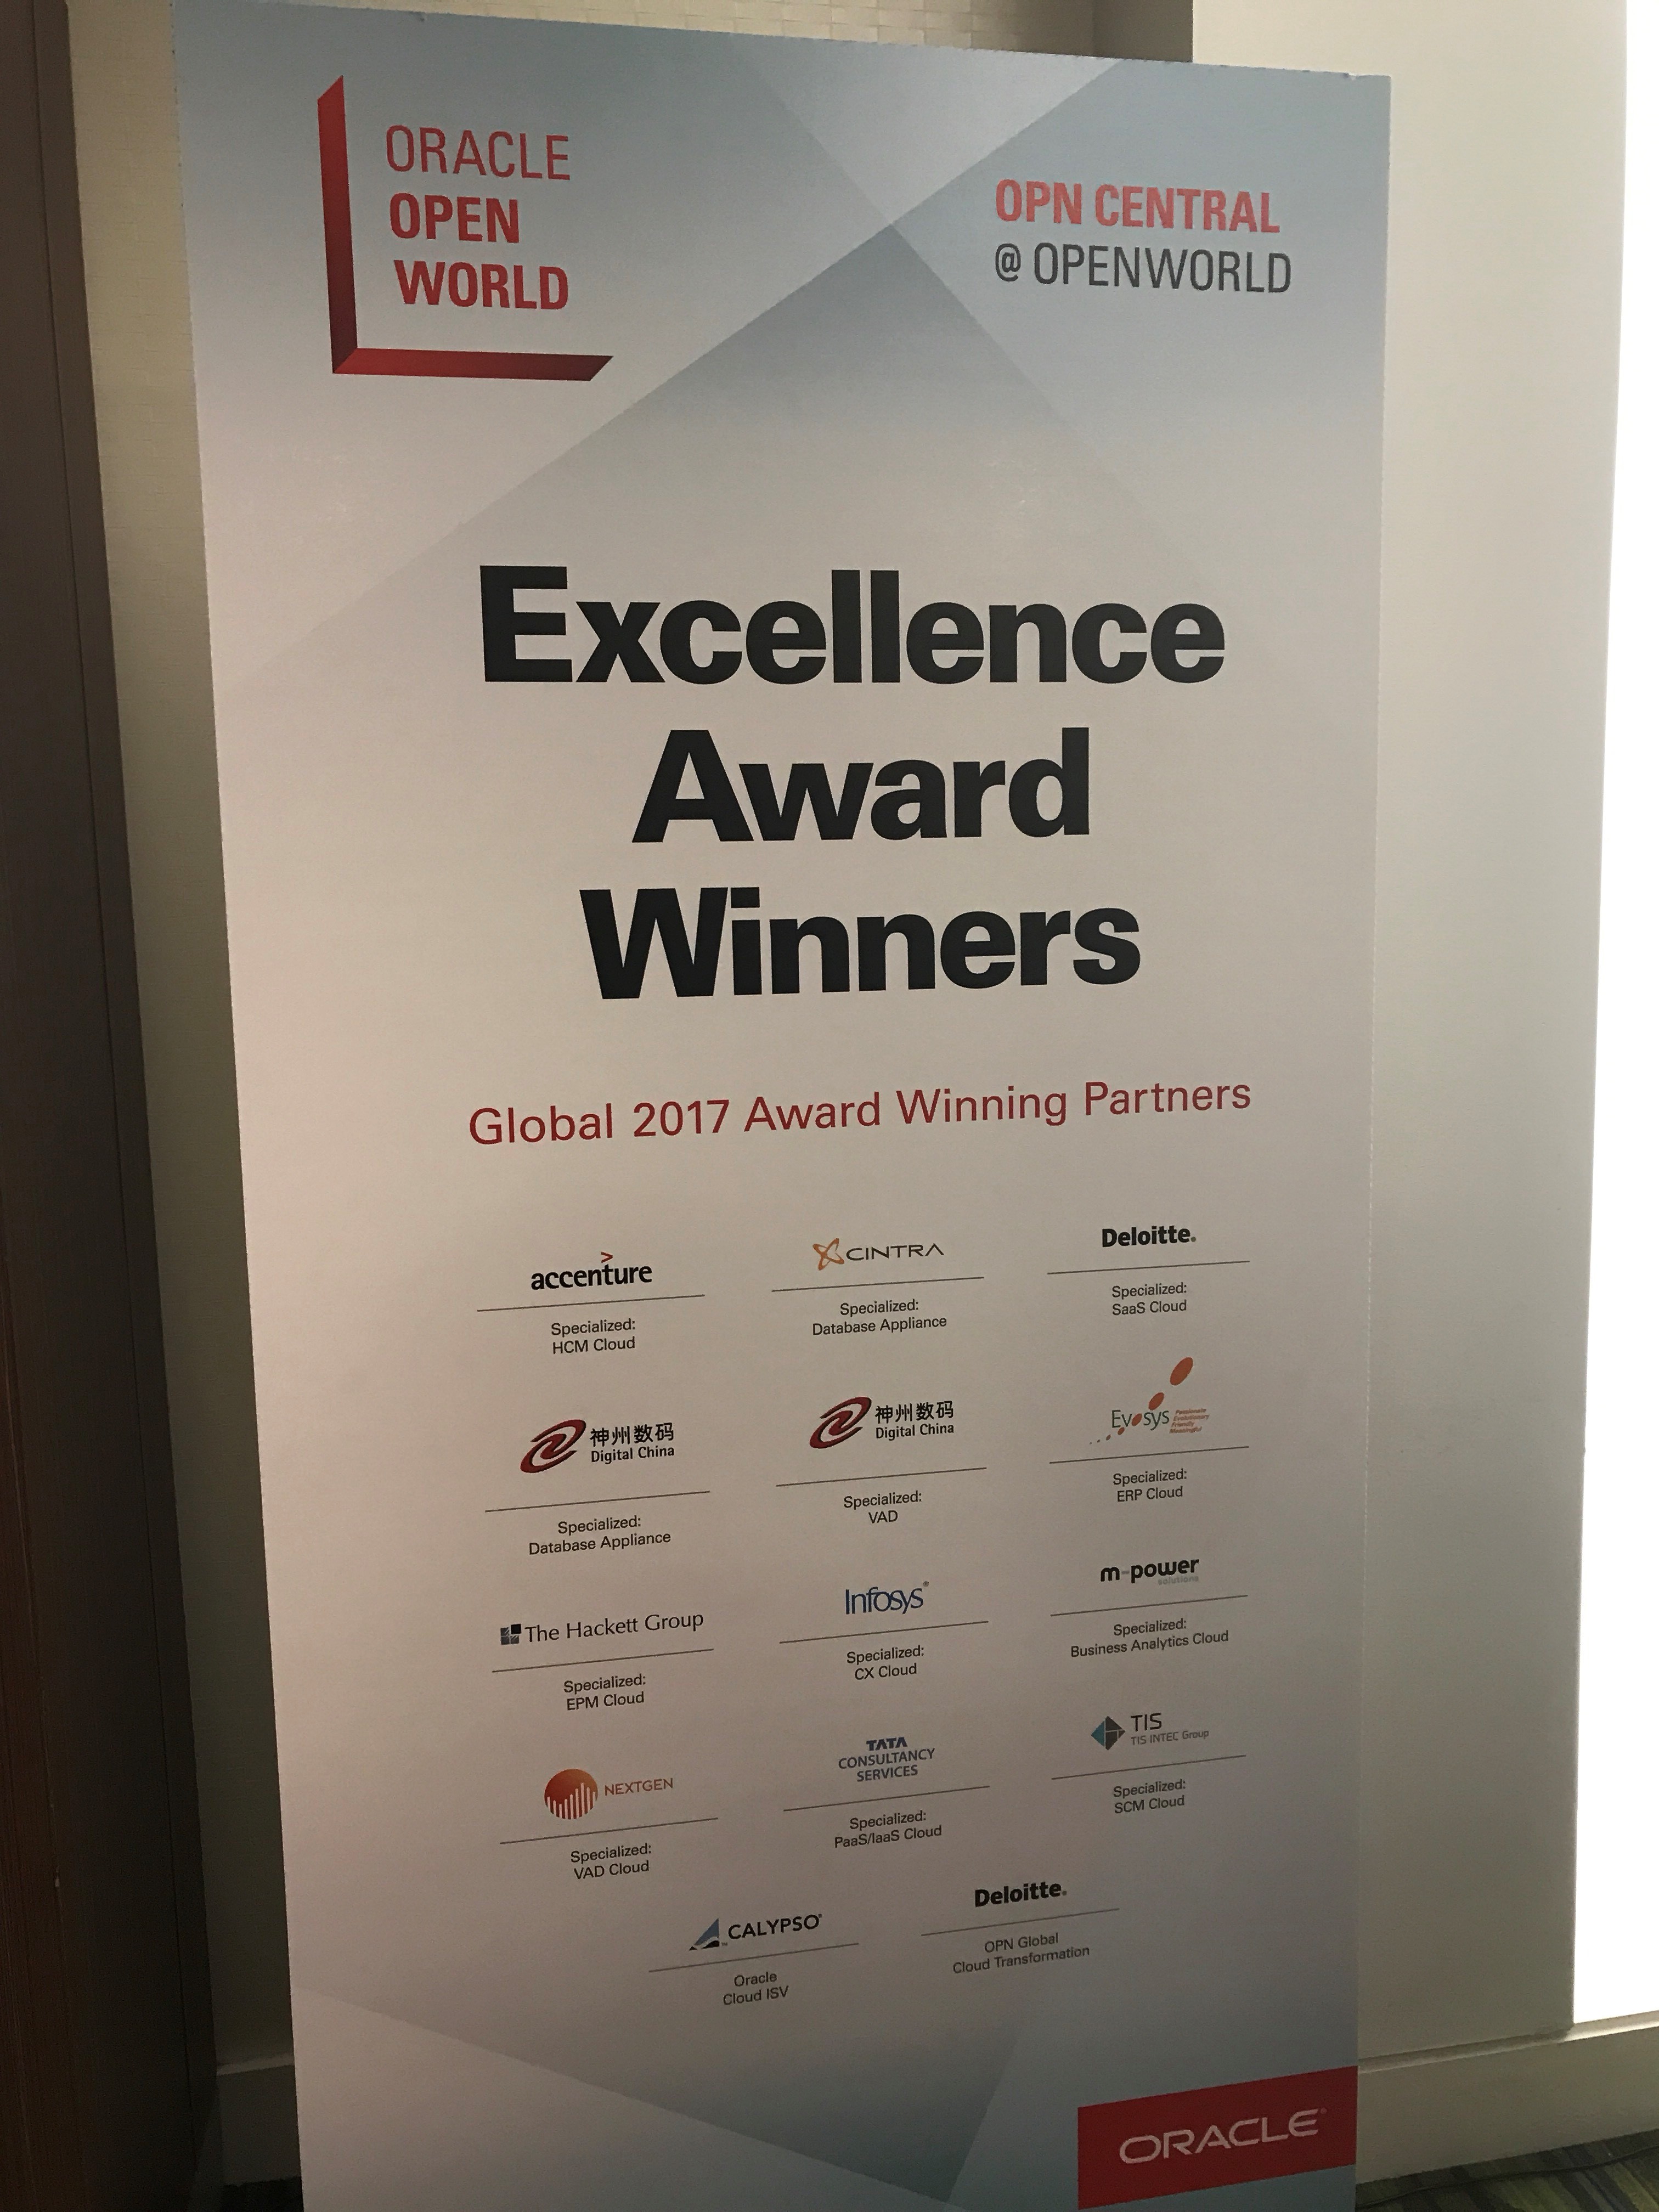 Cintra wins prestigious Oracle Excellence Award for Specialized Partner